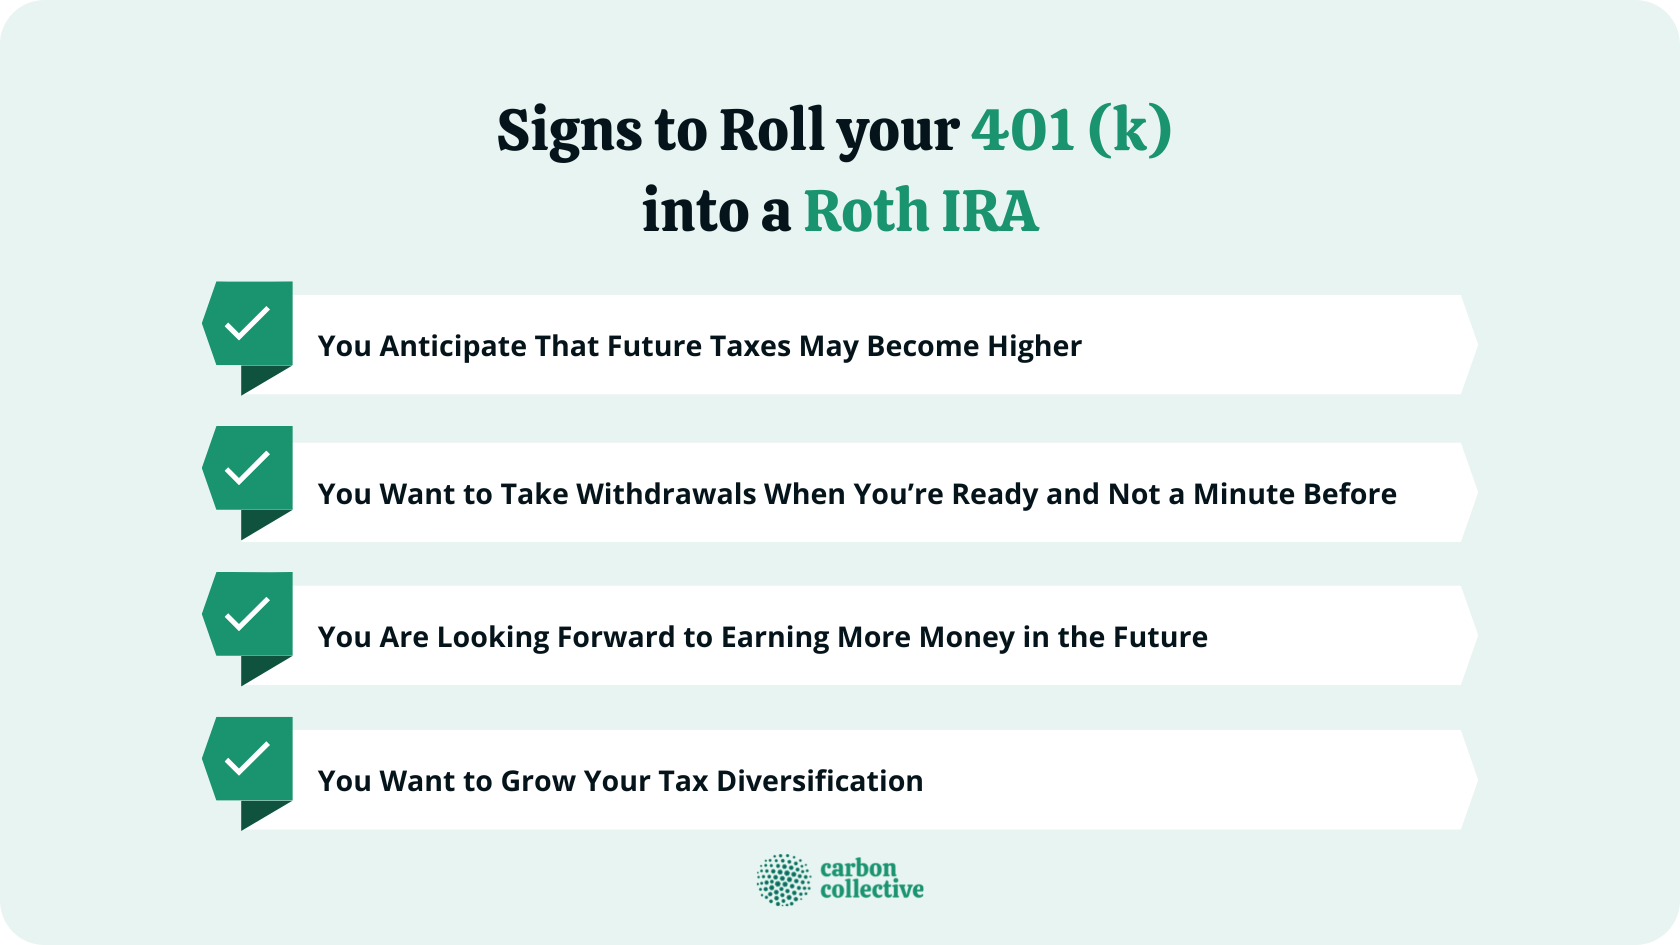 Signs_to_Roll_your_401_(k)_into_a_Roth_IRA-1